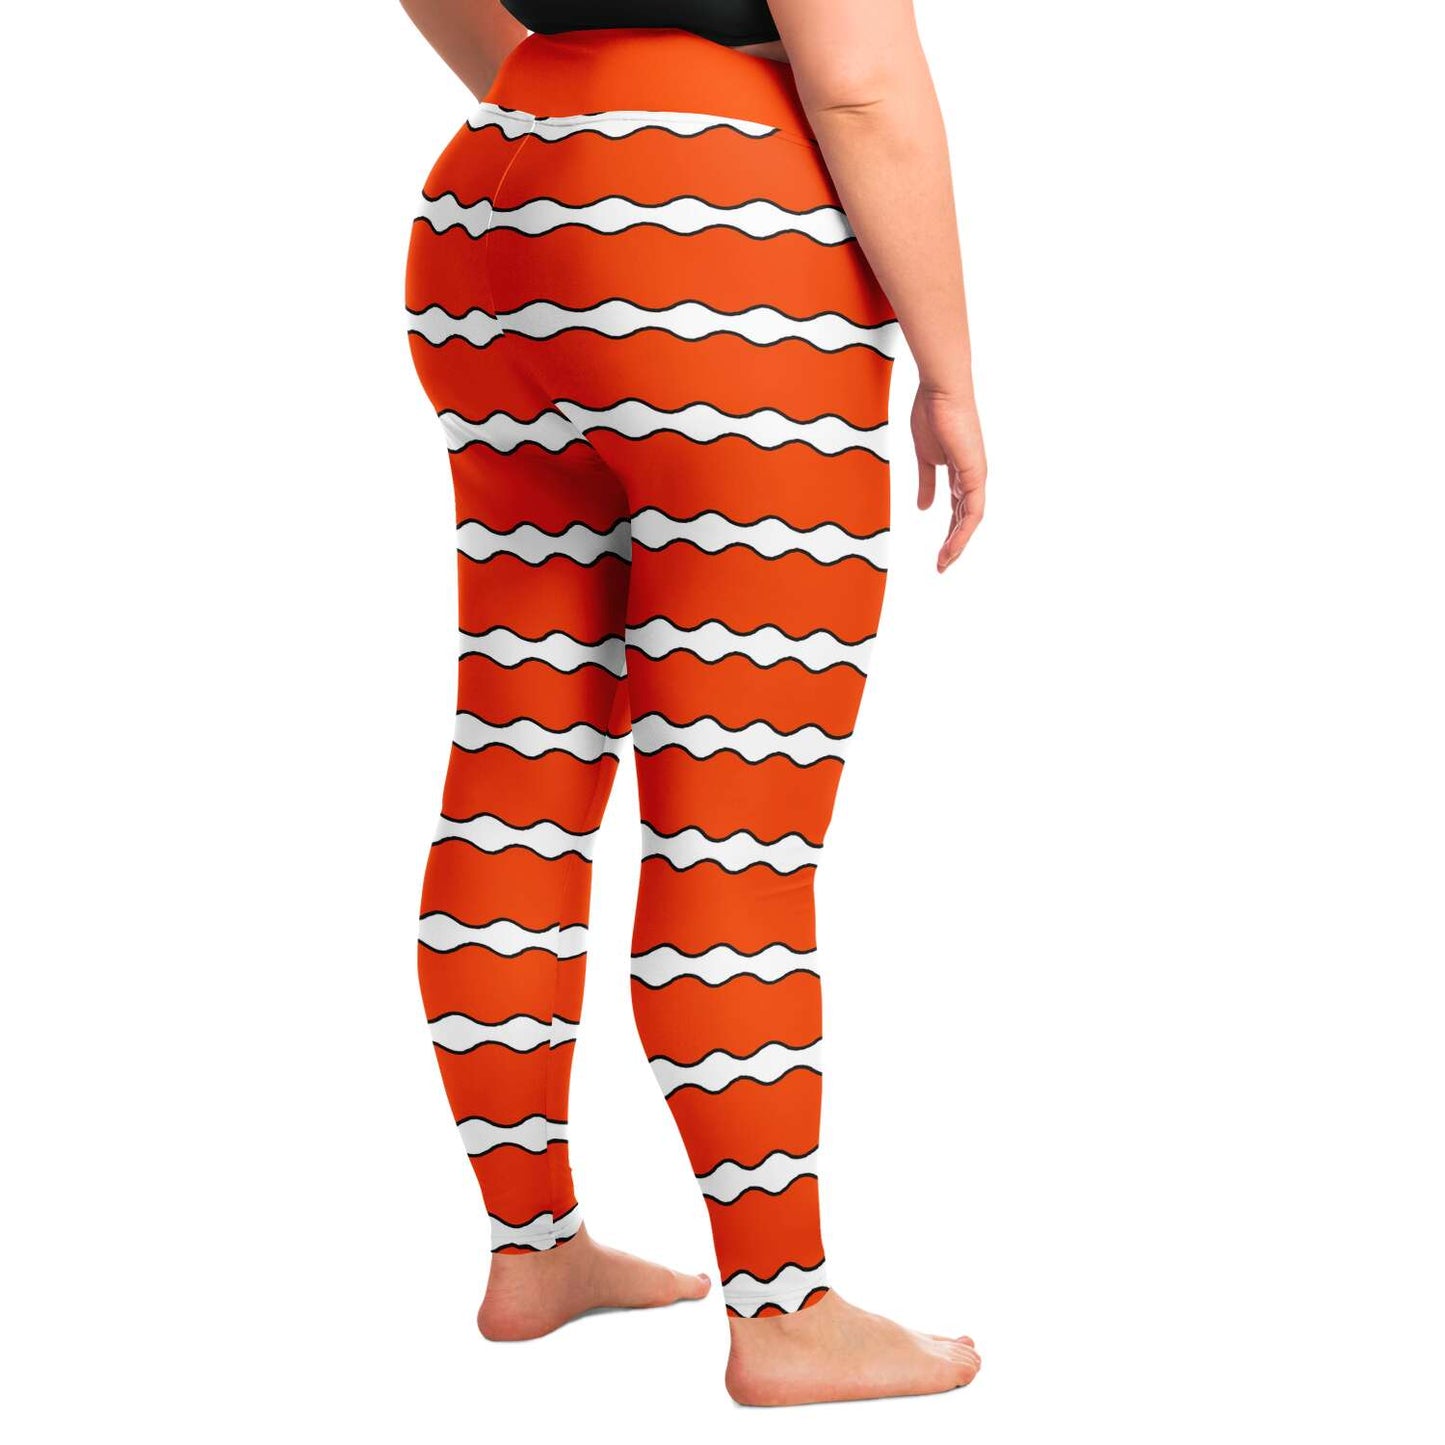 Clownfish leggings / skins - plus size - side view on model - for scuba diving, yoga and more